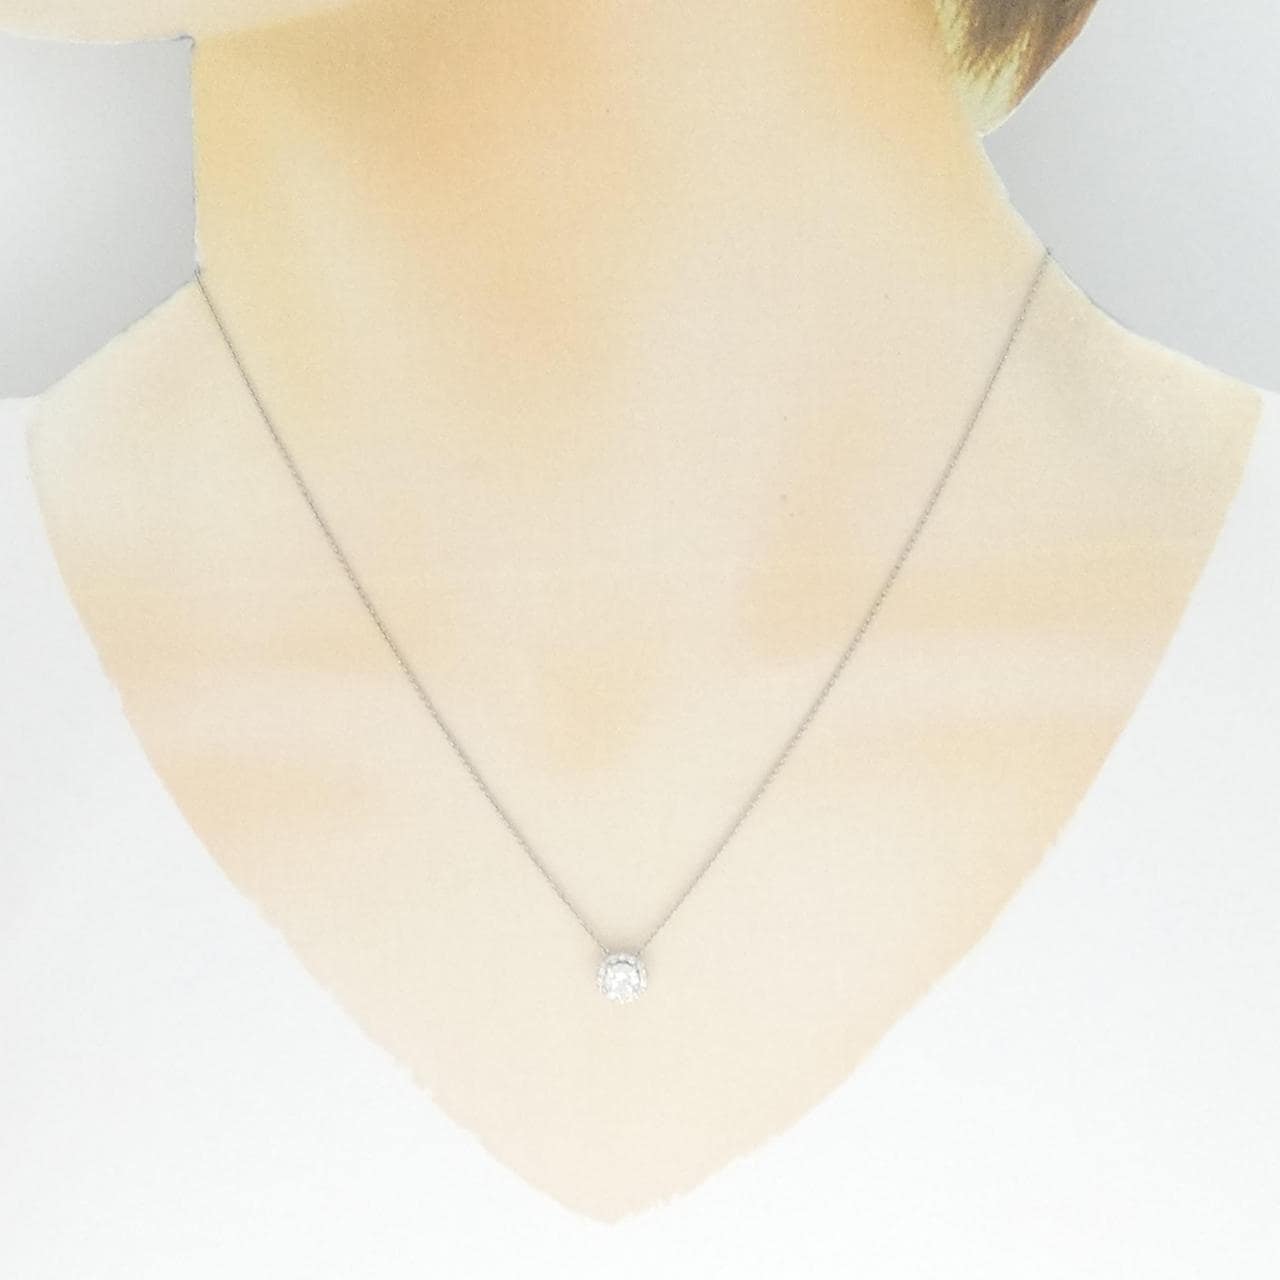 [Remake] PT Diamond Necklace 0.324CT G SI2 EXT